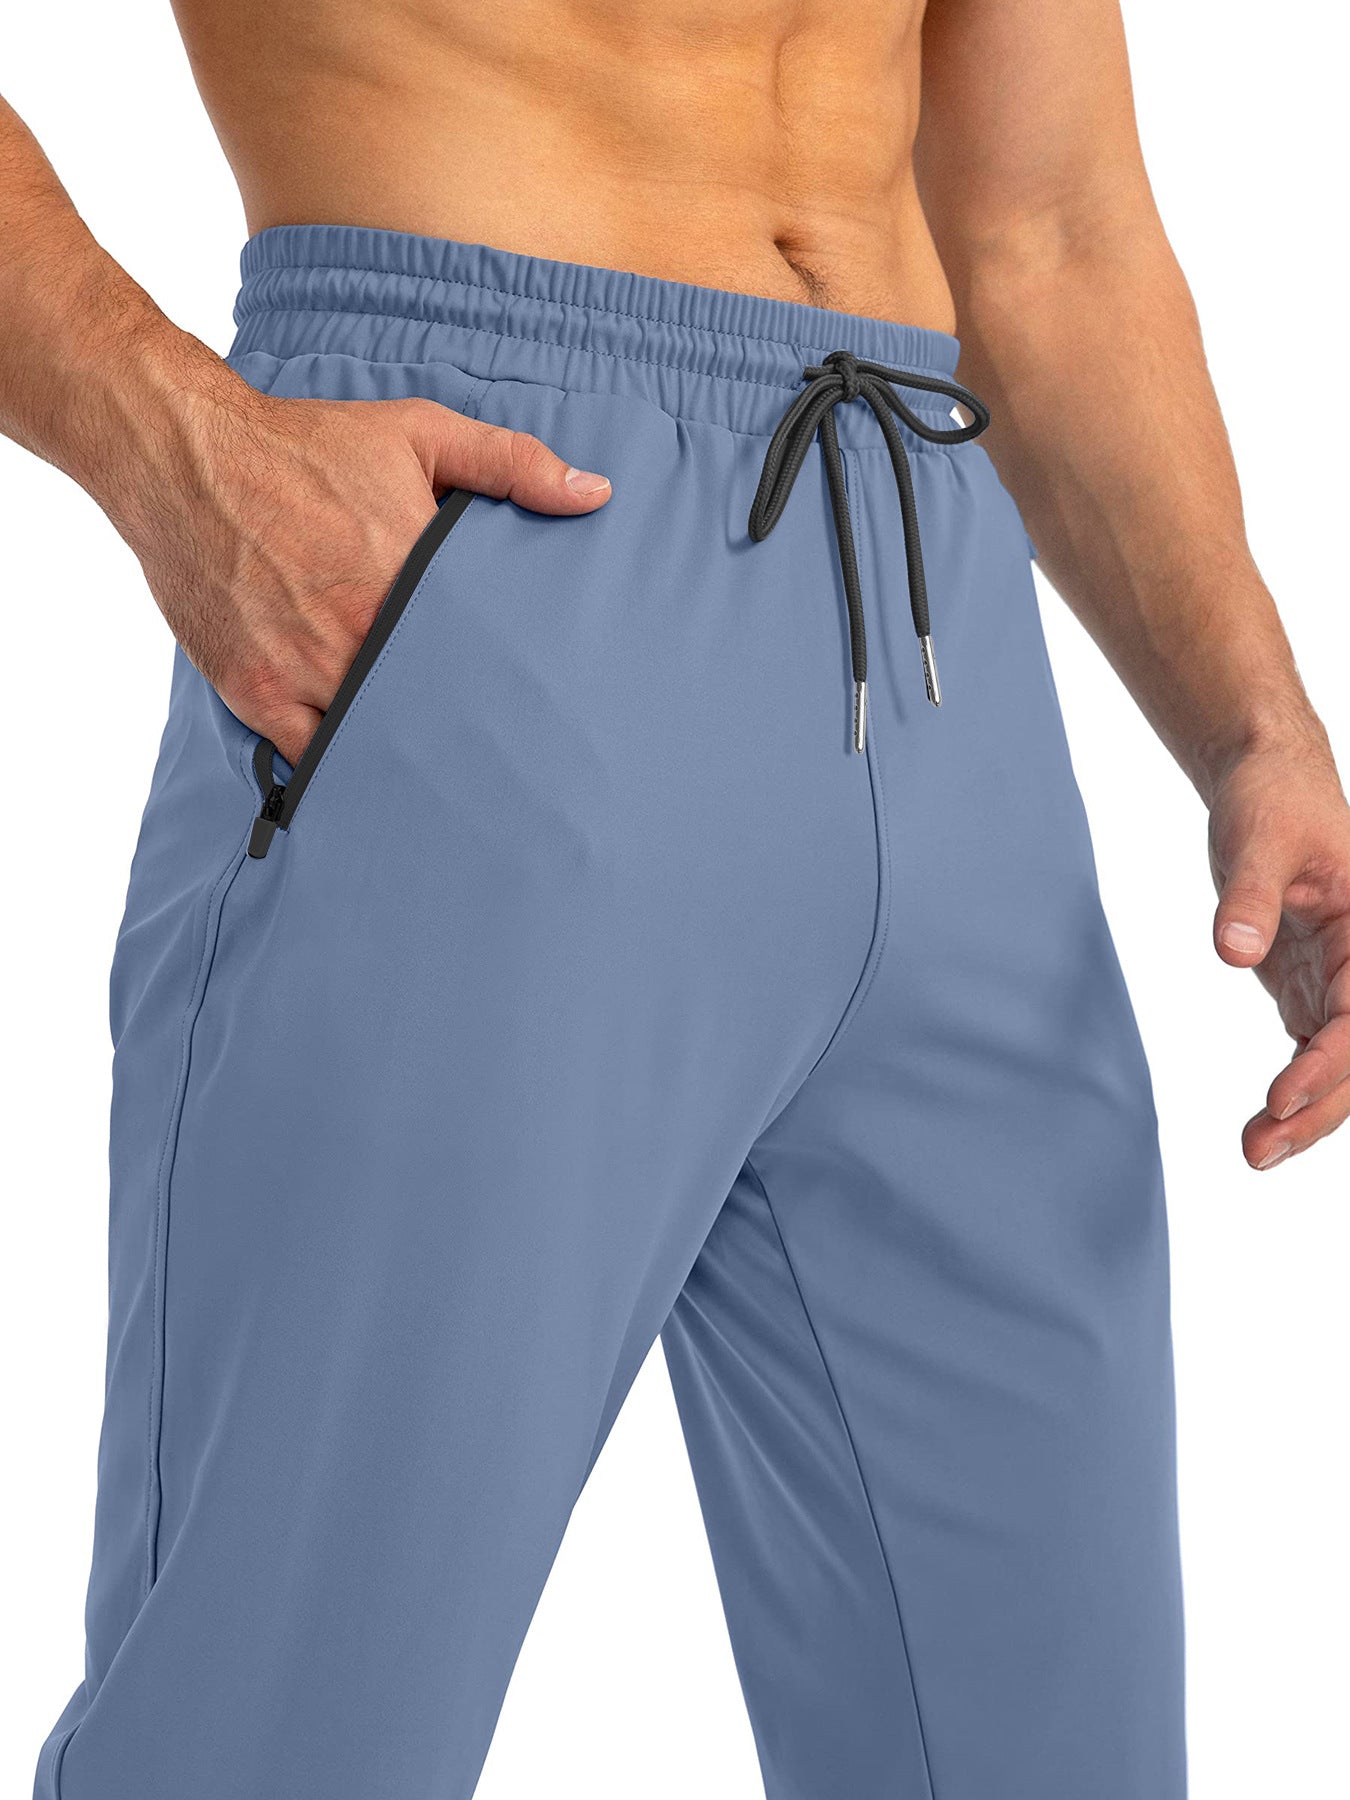 Men's Sports Pants Quick-drying Loose Running Leisure